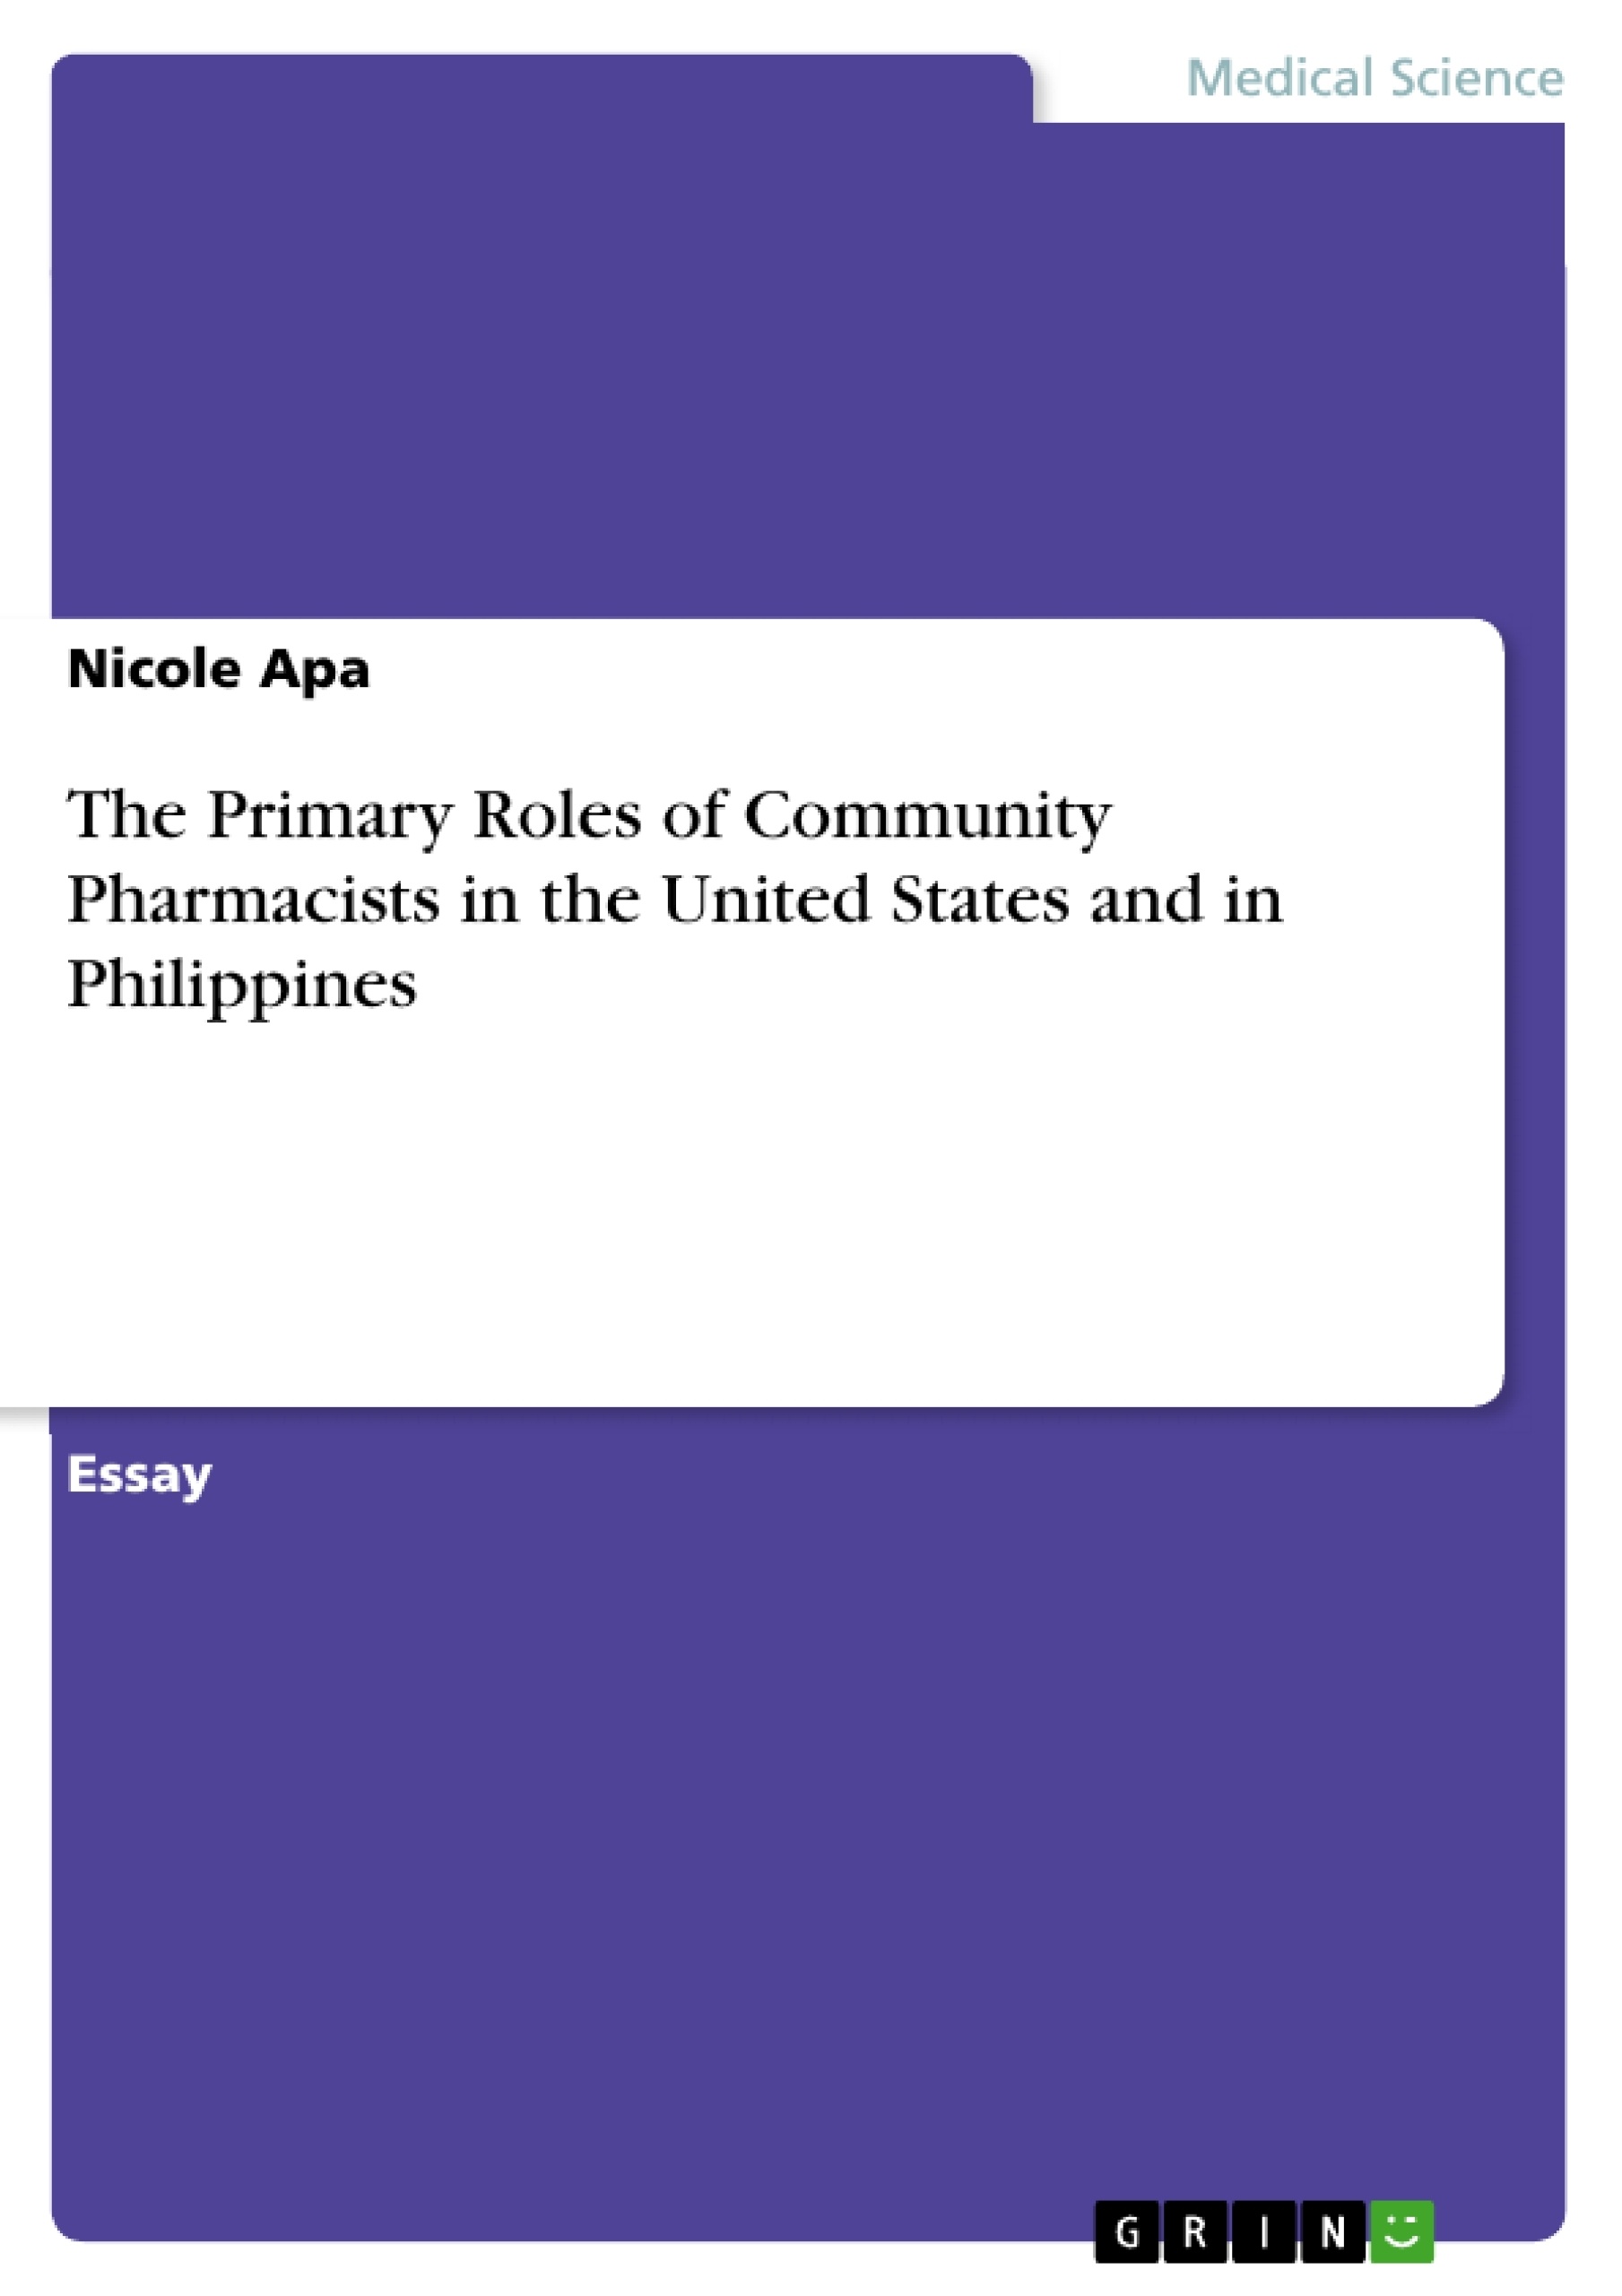 Title: The Primary Roles of Community Pharmacists in the United States and in Philippines